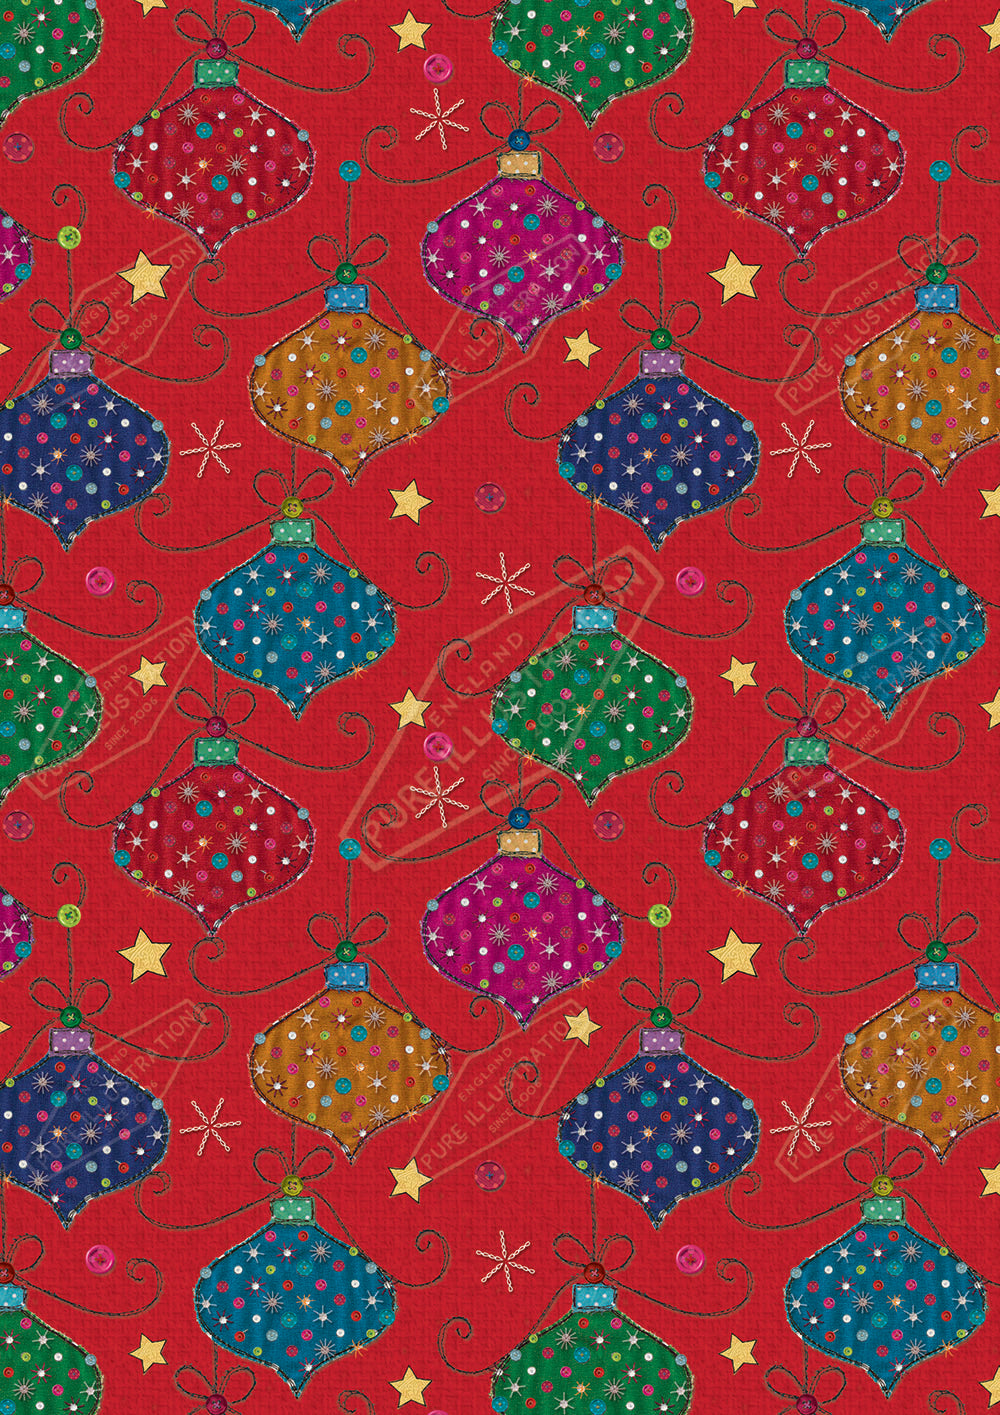 00030129KSP- Kerry Spurling is represented by Pure Art Licensing Agency - Christmas Pattern Design